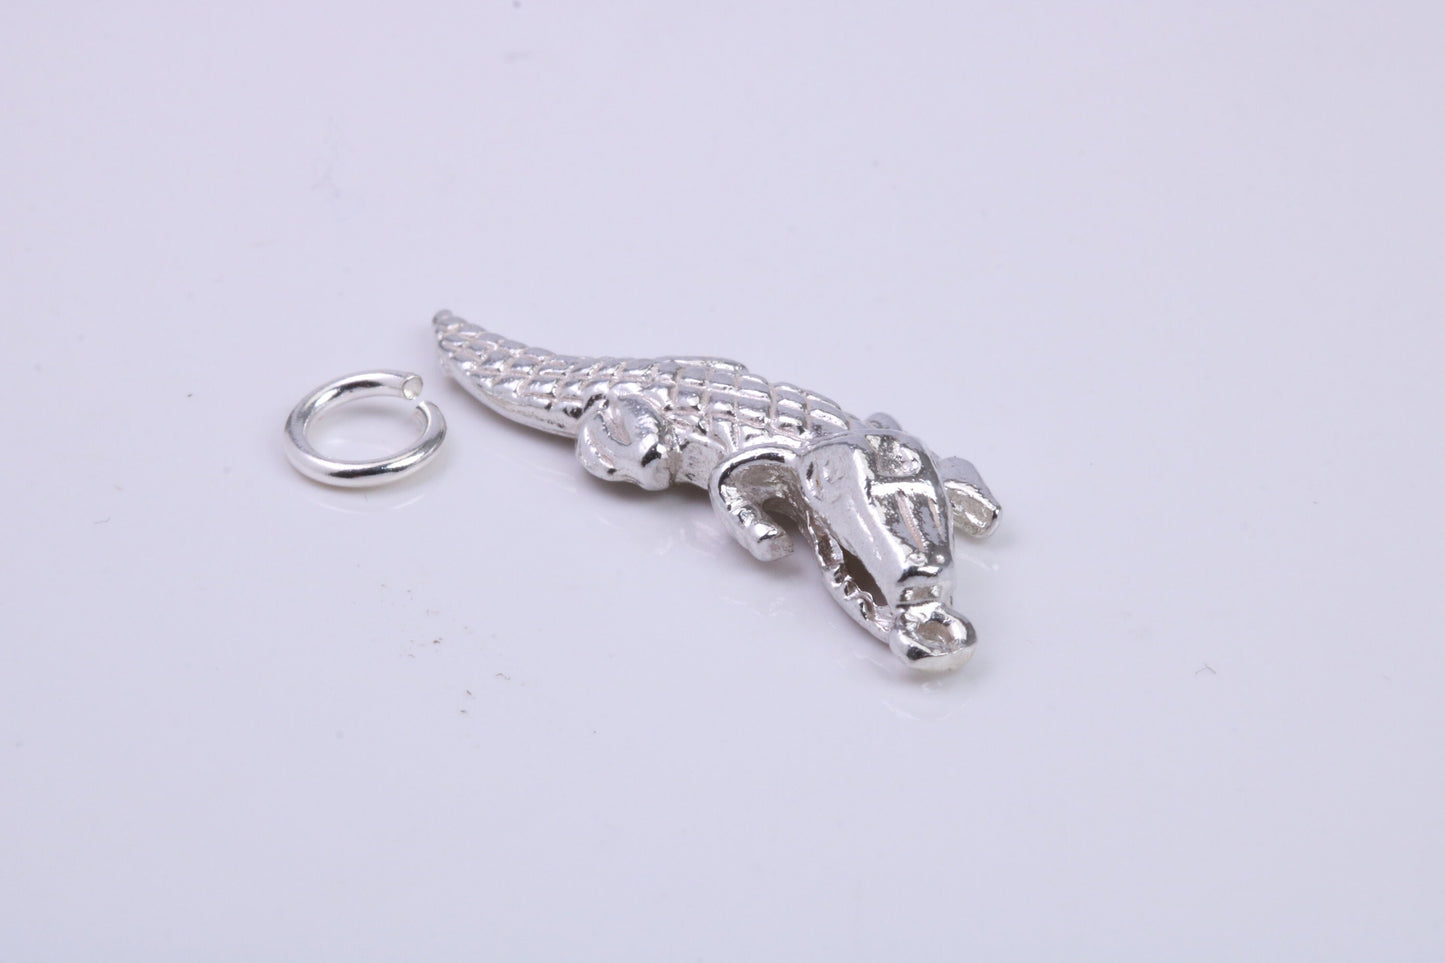 Crocodile Charm, Traditional Charm, Made from Solid 925 Grade Sterling Silver, Complete with Attachment Link